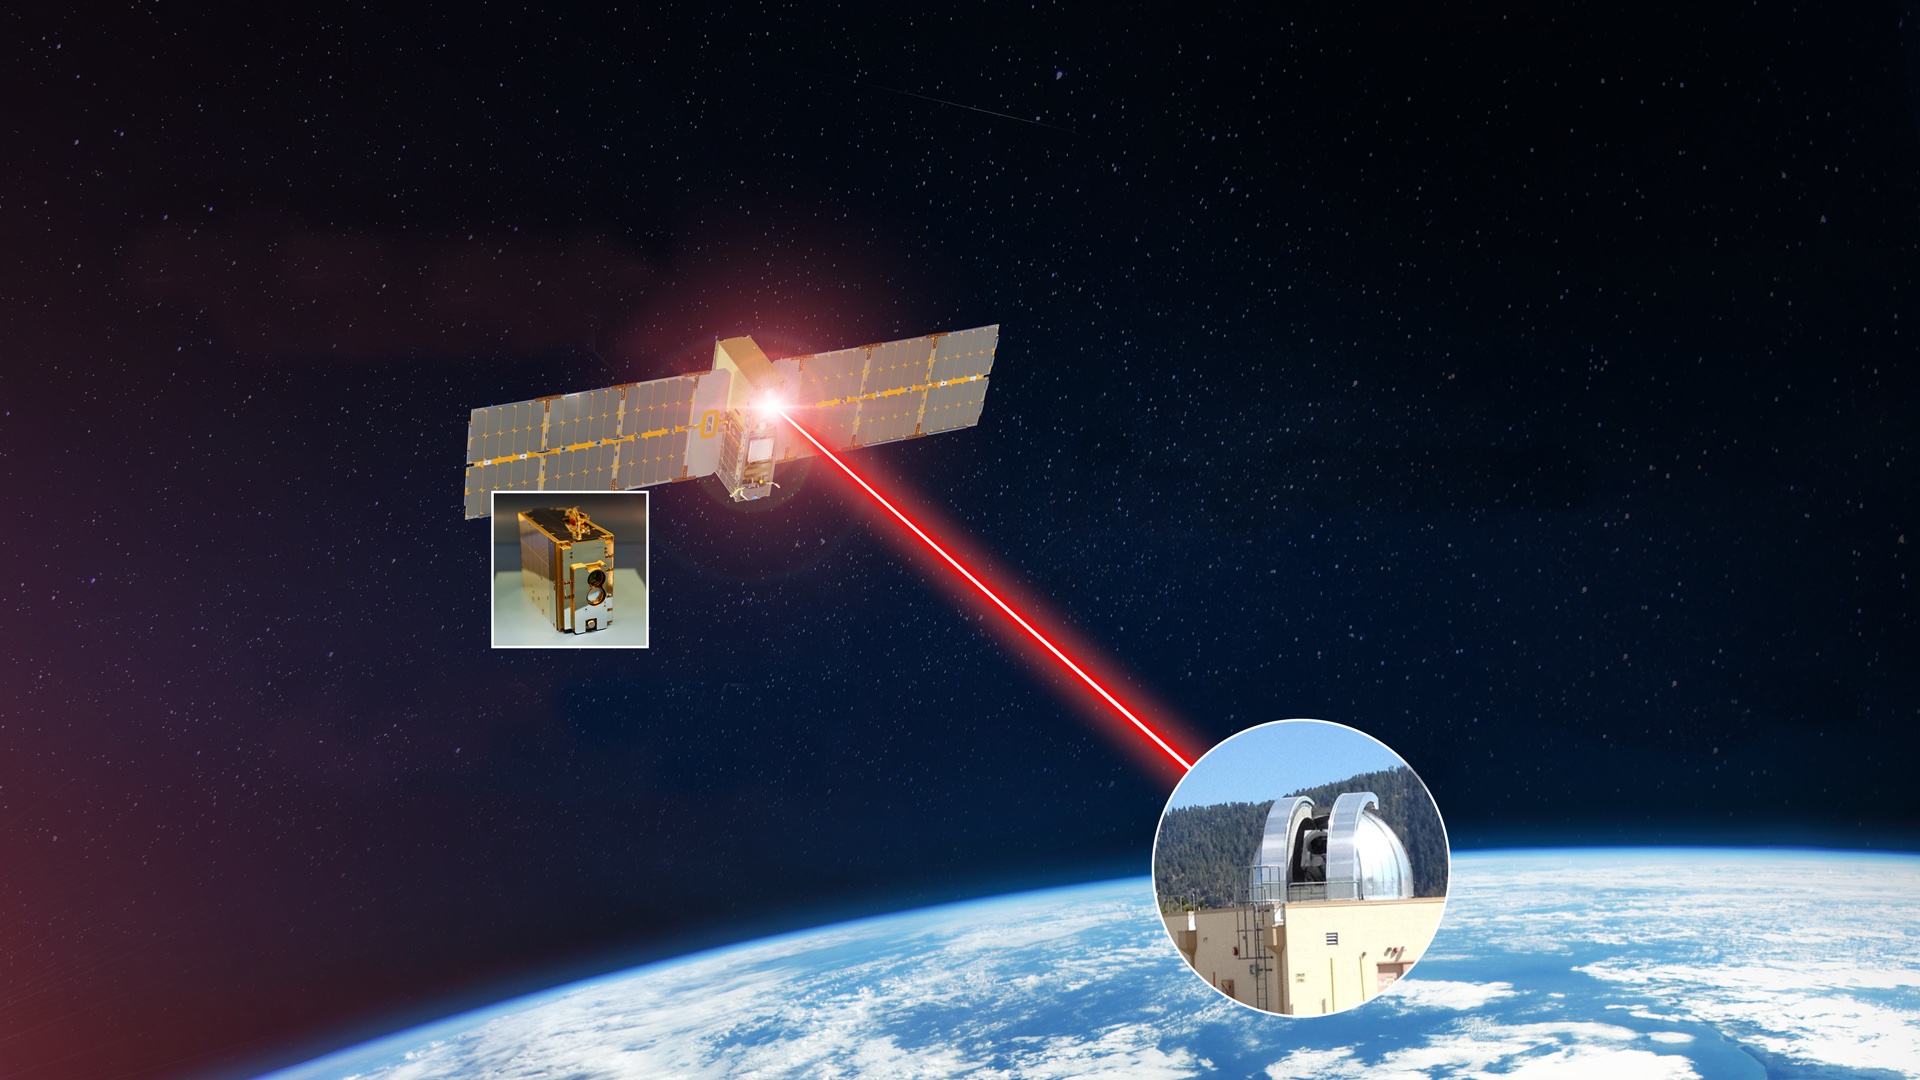 A schematic showing a laser link between a satellite in space and a ground station on Earth.